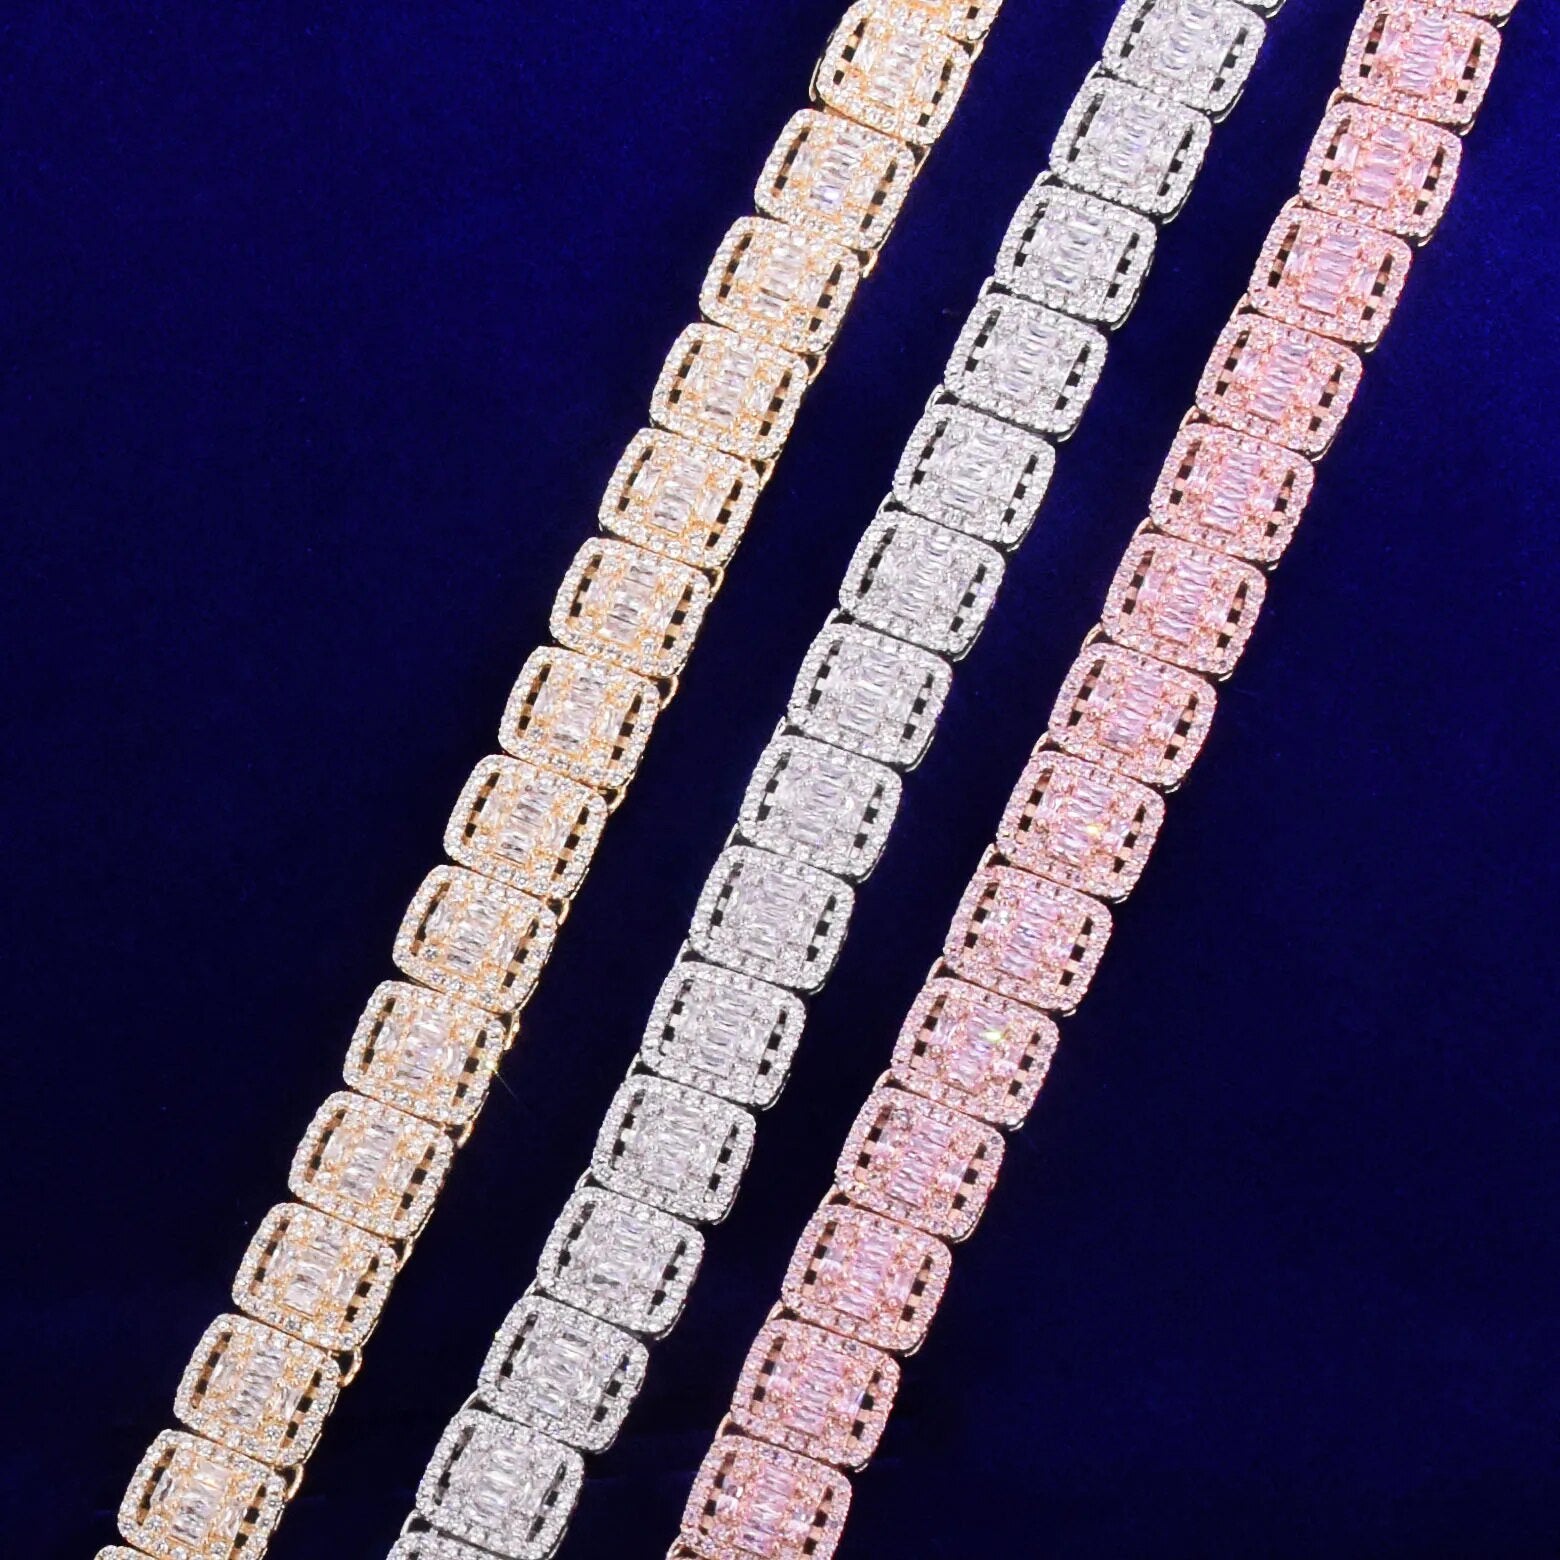 12MM SQUARE BAGUETTE TENNIS ICED-OUT DIAMOND NECKLACE CHAIN